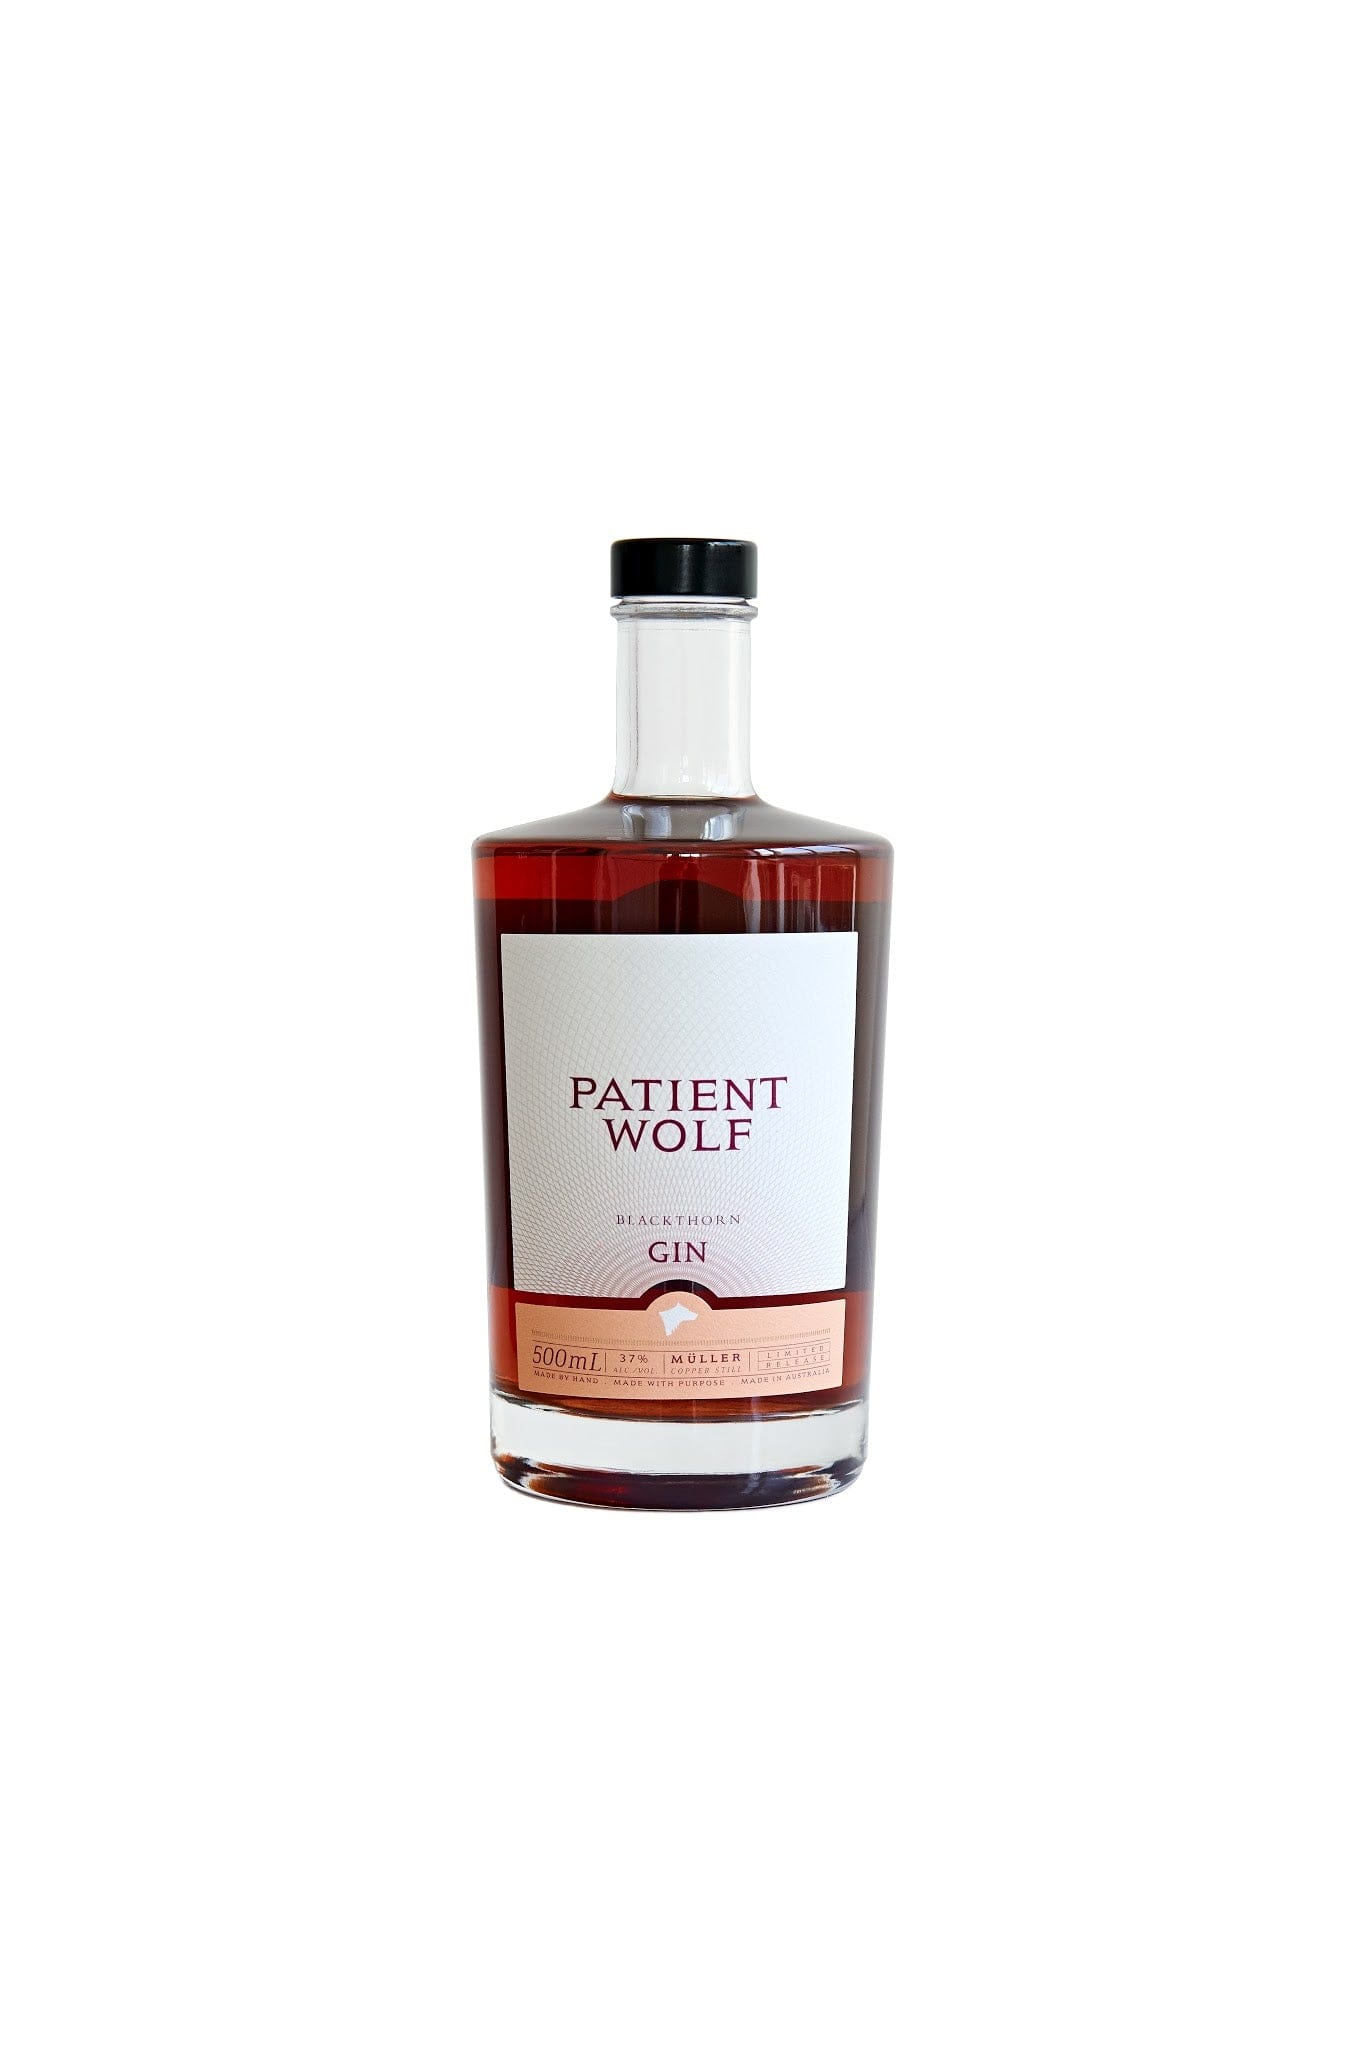 Patient Wolf Gin Triple Pack - Melbourne Dry, Summer Thyme & Blackthorn